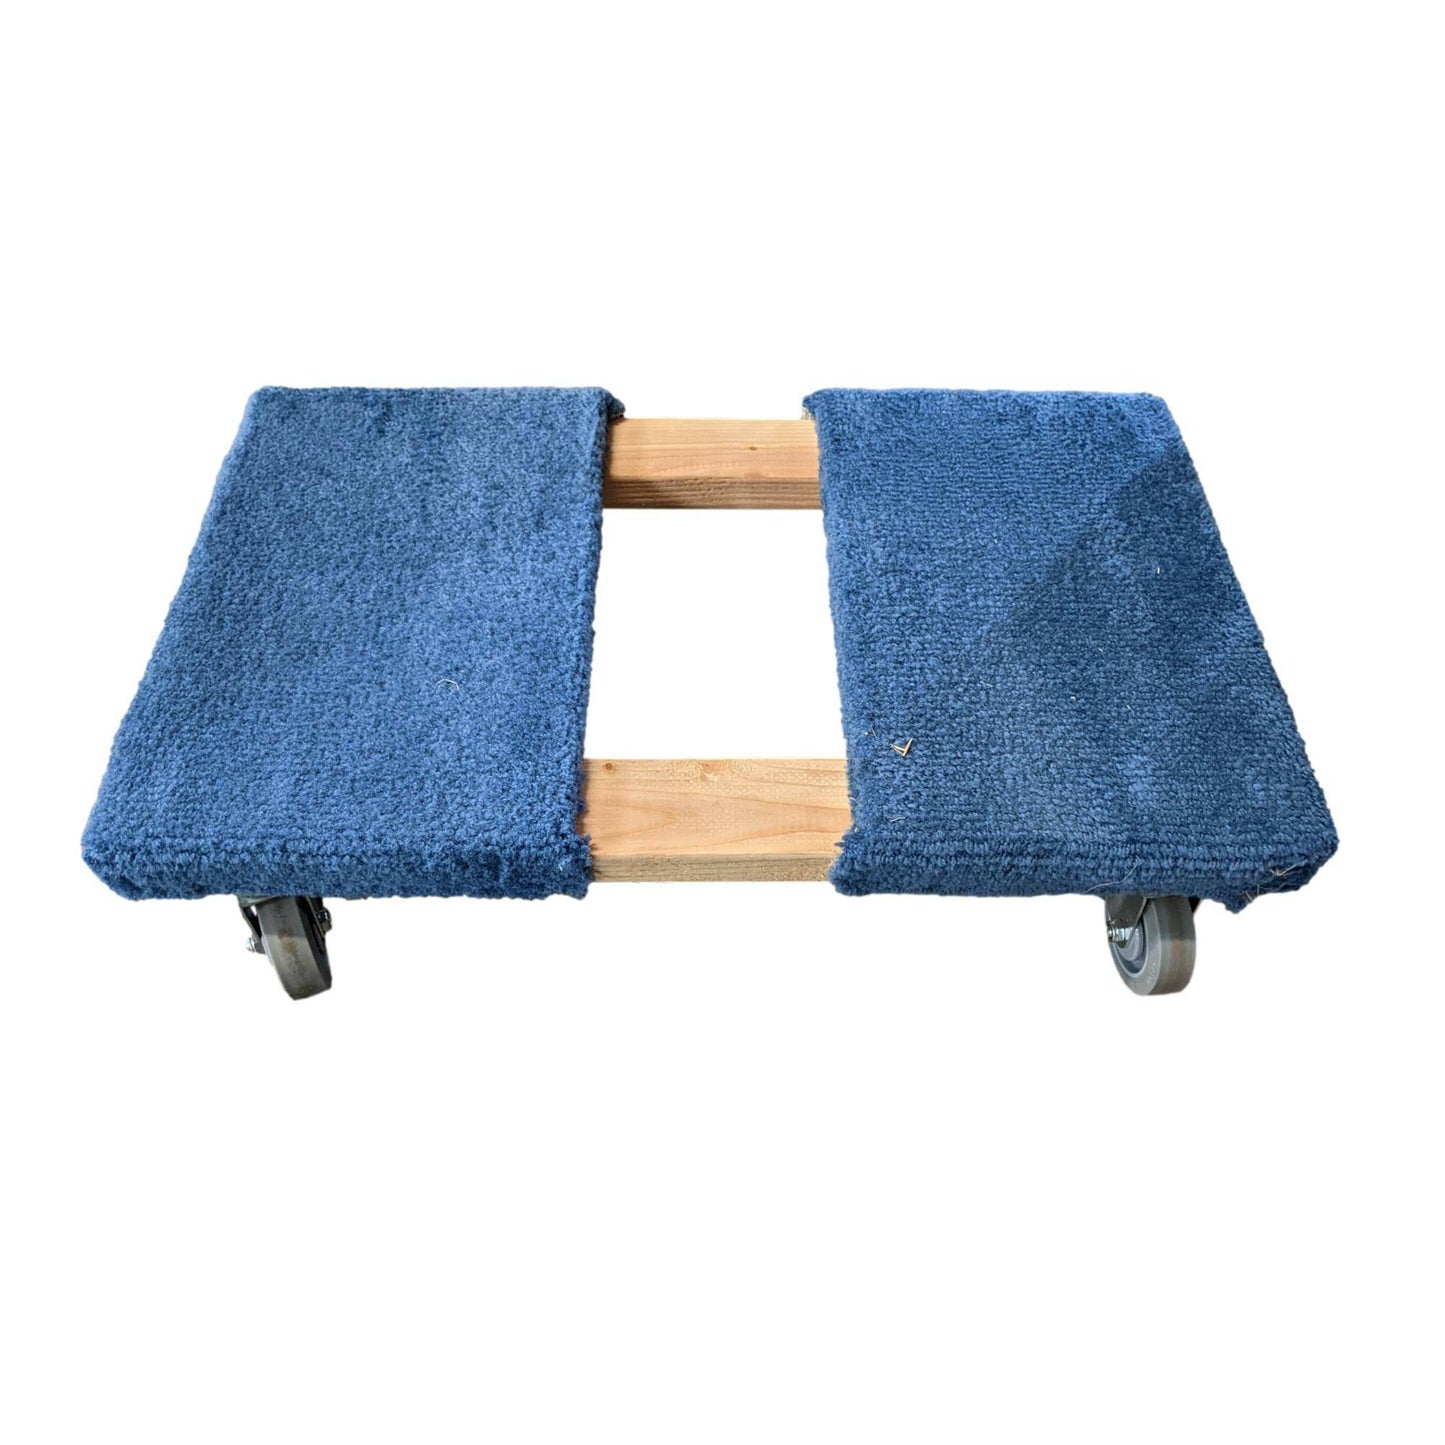 Carpeted Pro-Mover Trade Show Dolly w- Four 4" Thermoplastic Wheels - 1,000lb Capacity - Source 4 Industries